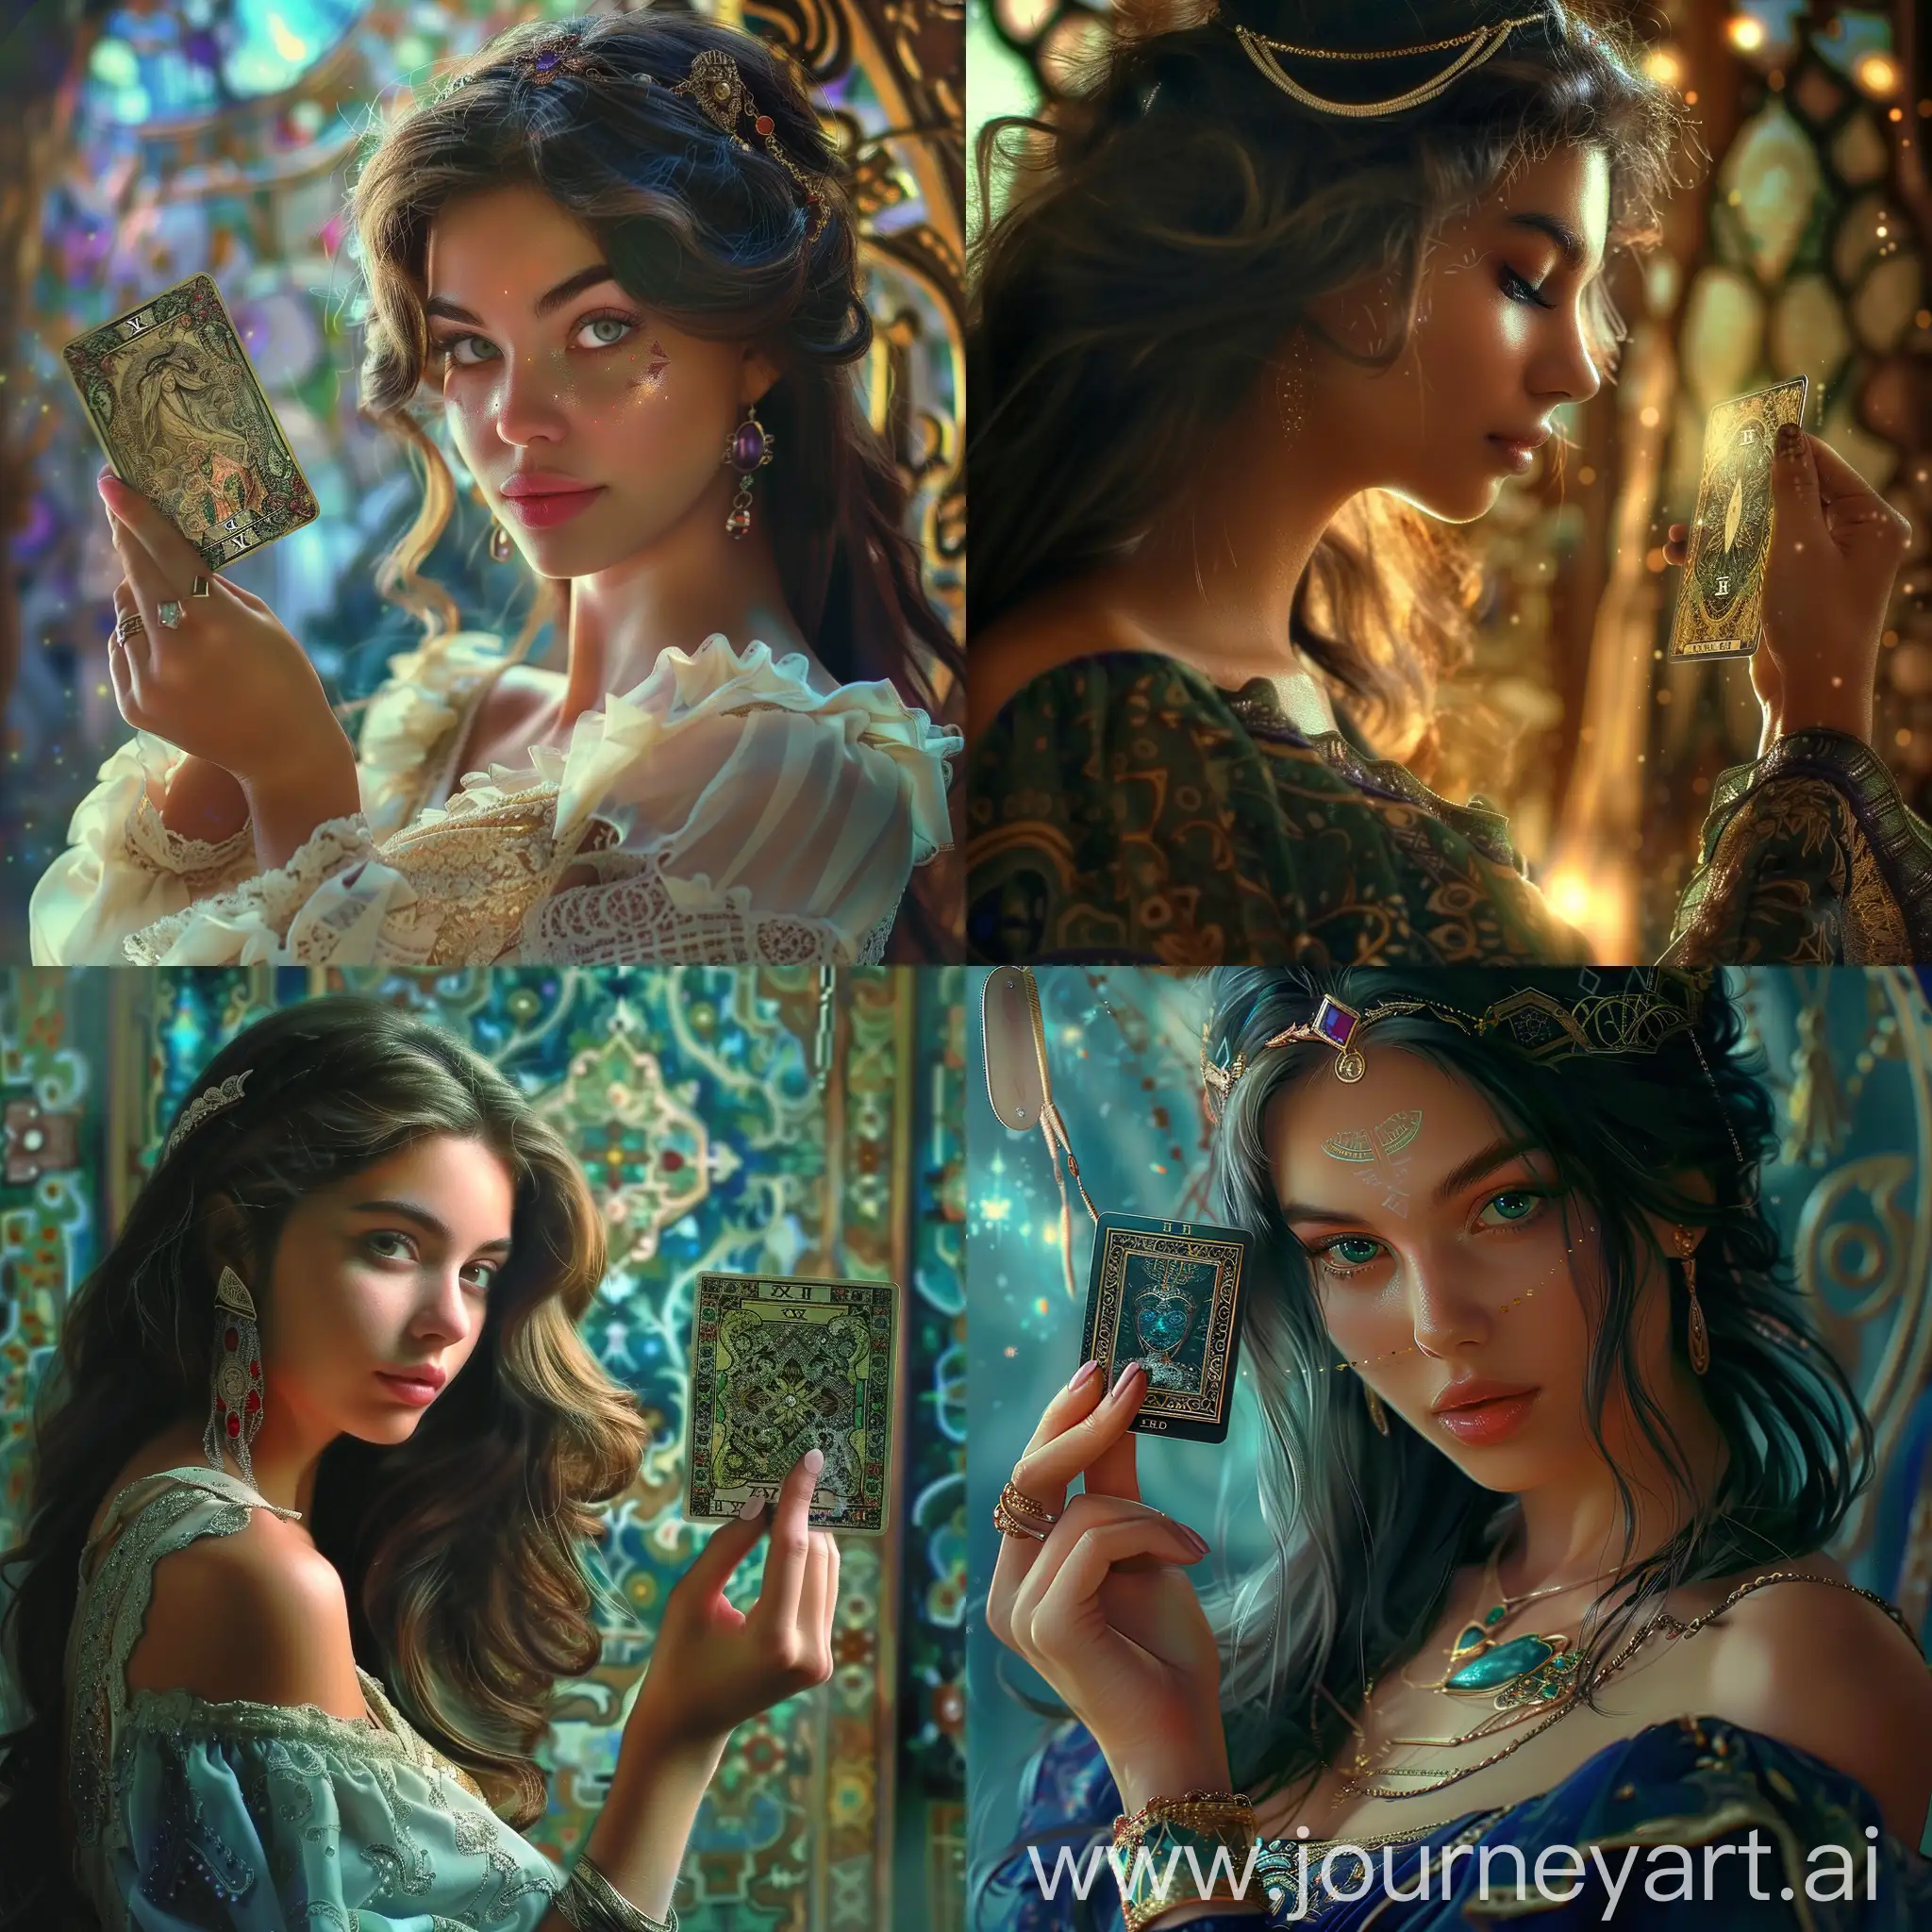 A beautiful fortune teller girl holds a tarot card face down in her hand. The environment is mystical, magical